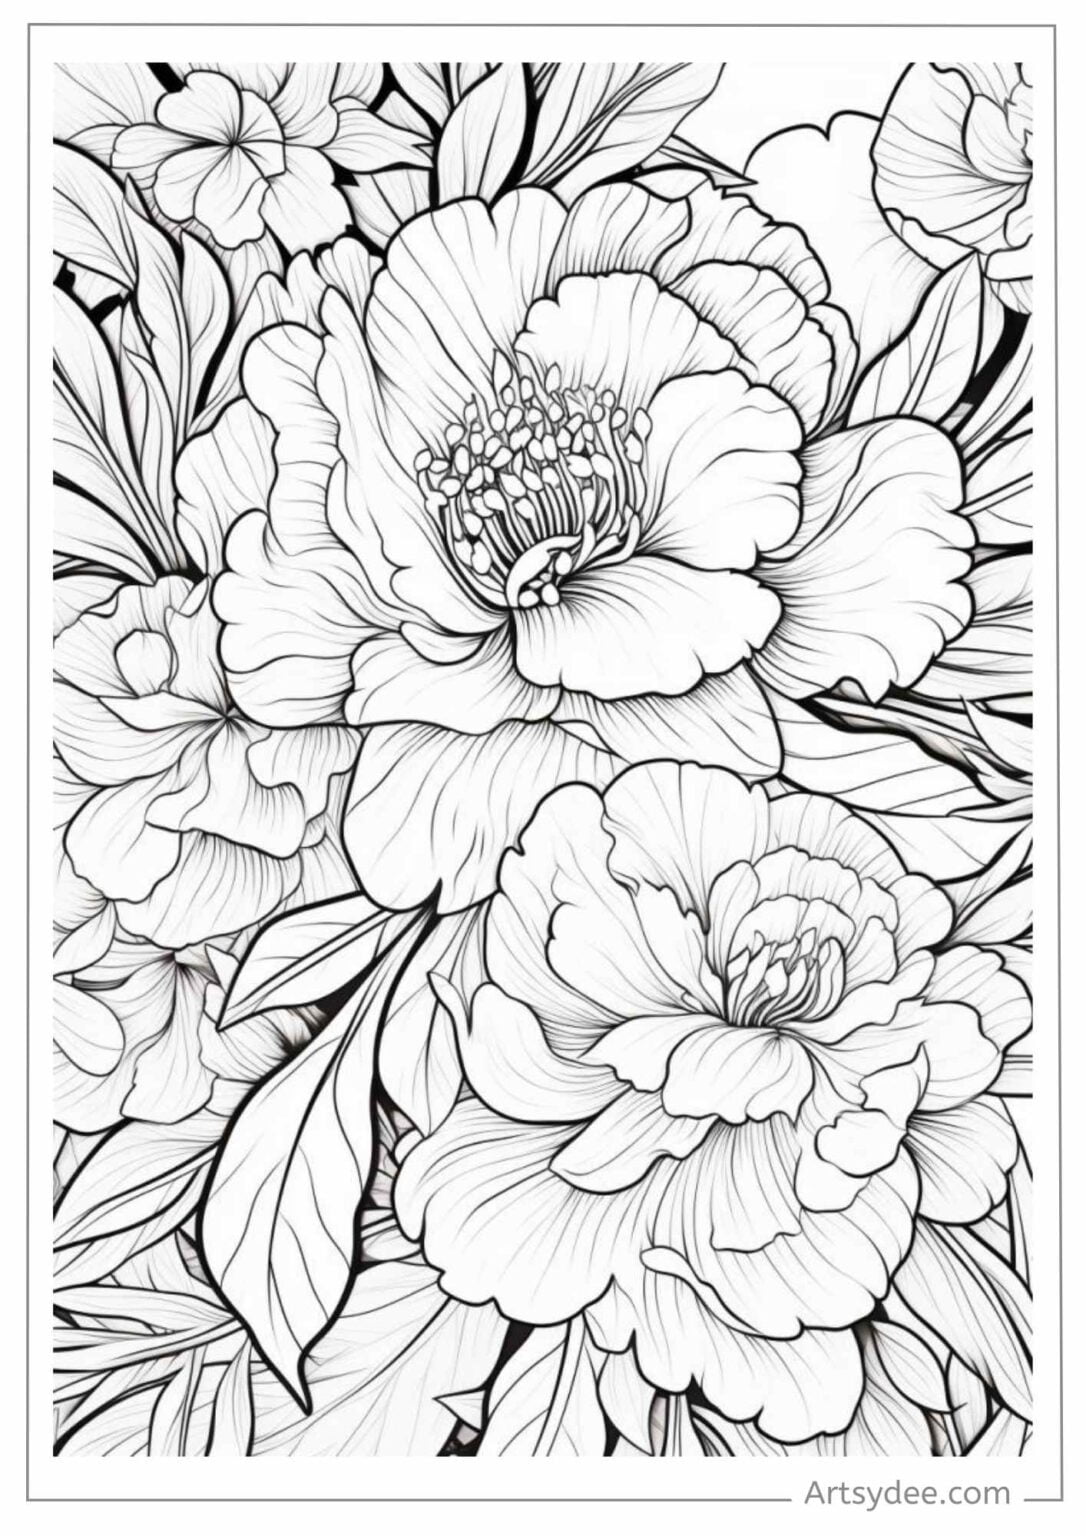 Blossom Your Creativity: 60+ Free Flower Coloring Pages to Inspire Your ...